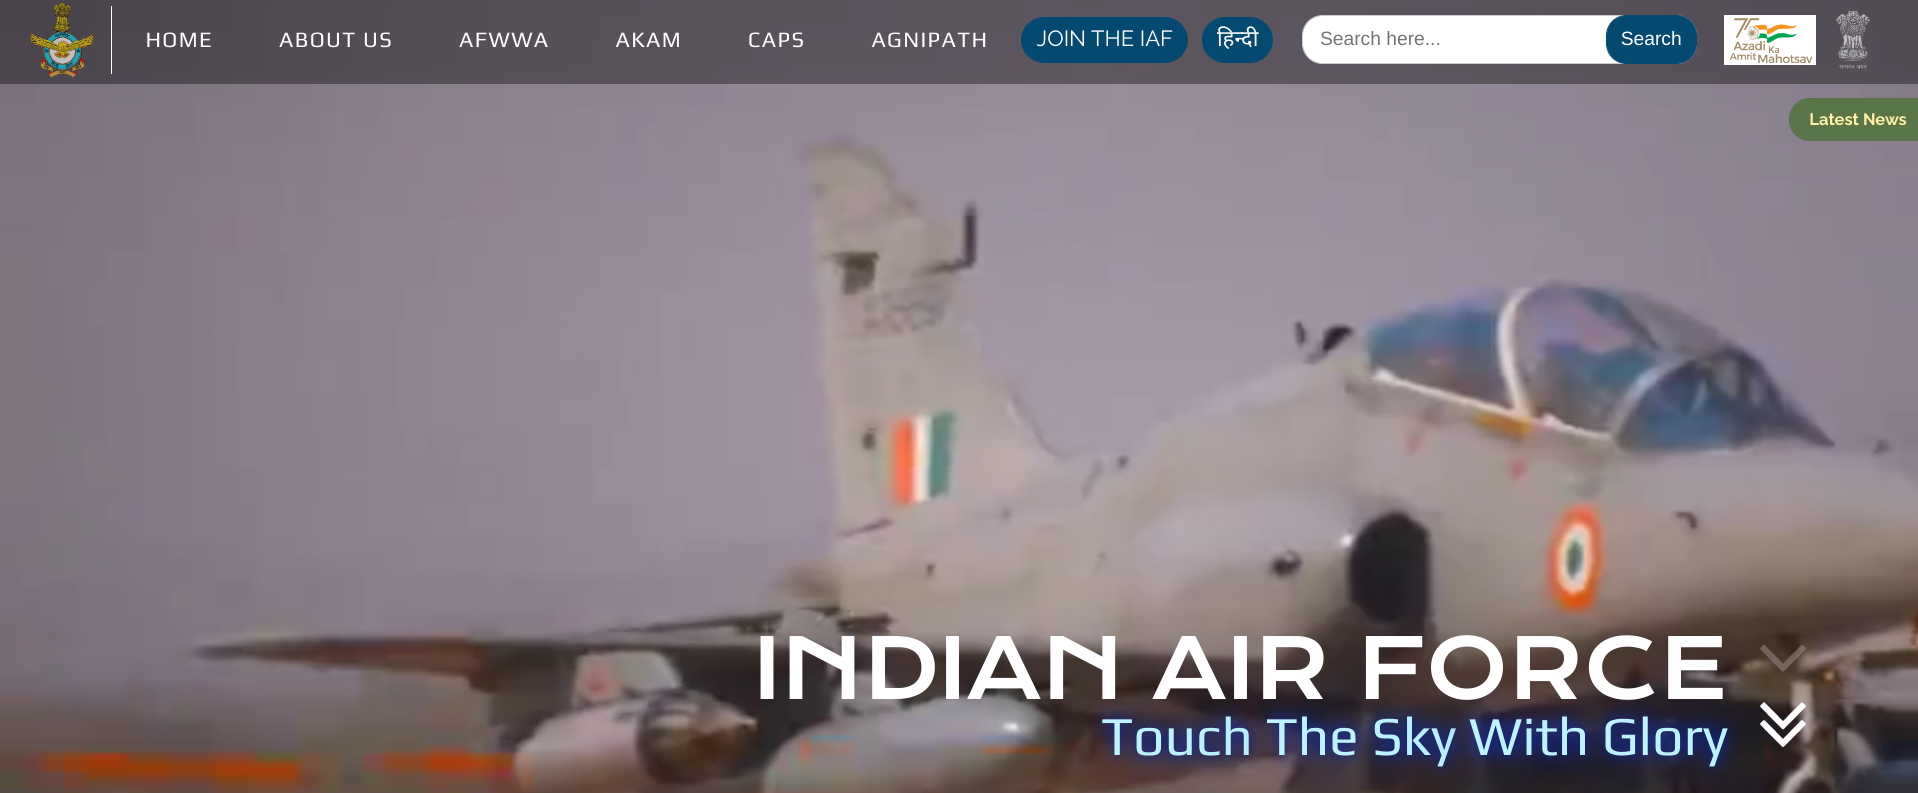 Agniveer Bharti Recruitment - indian air force home page